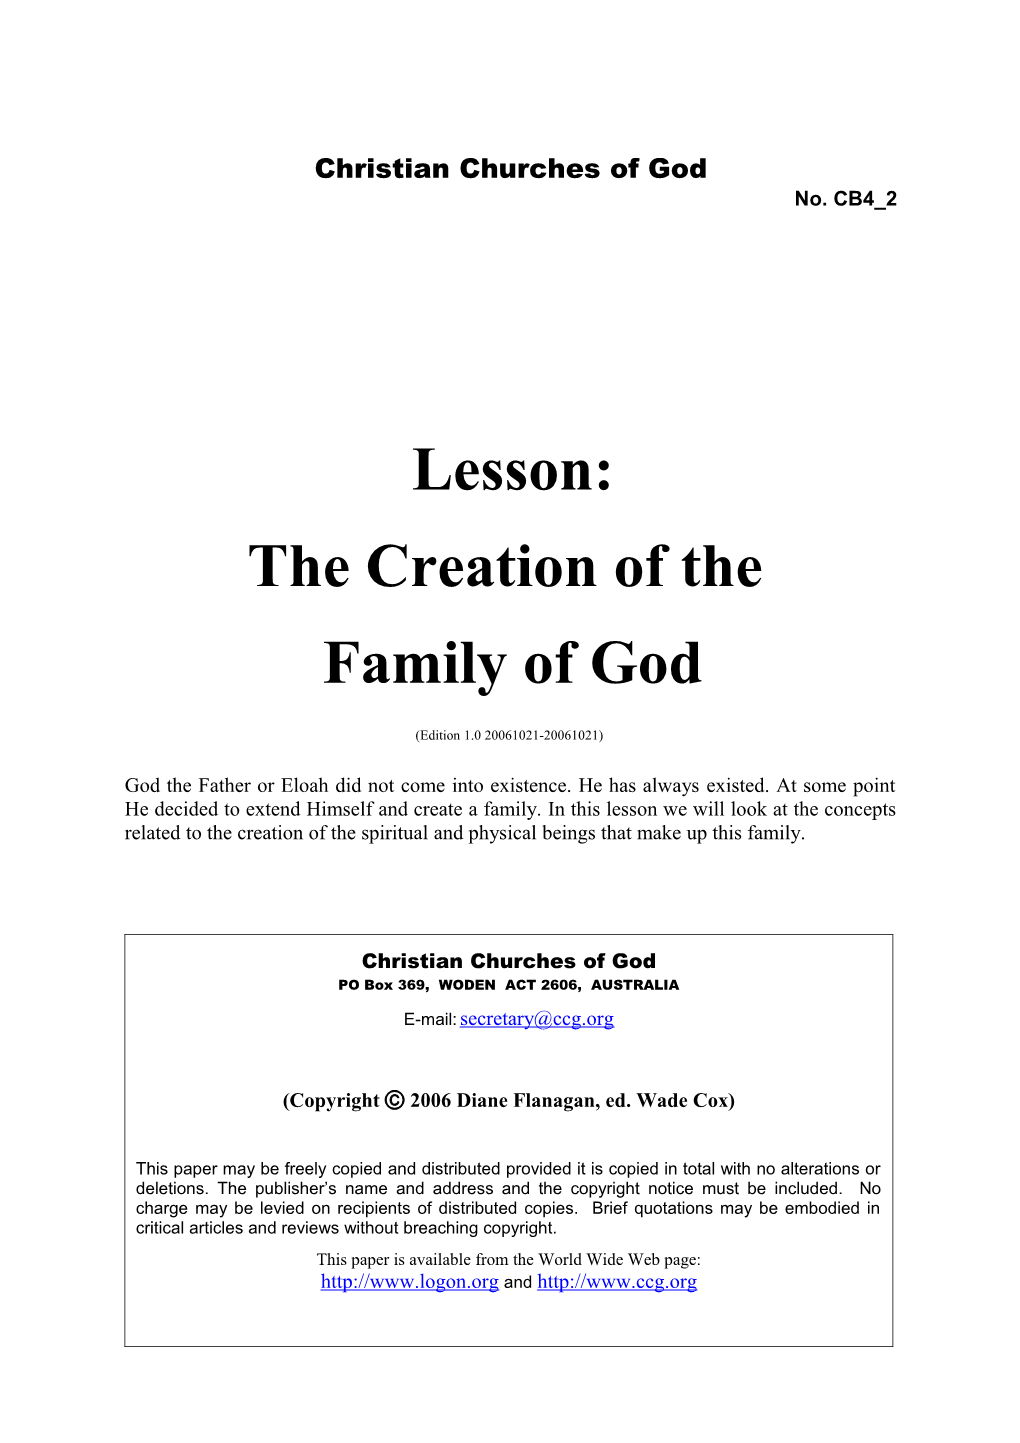 Lesson: the Creation of the Family of God (CB4 2)